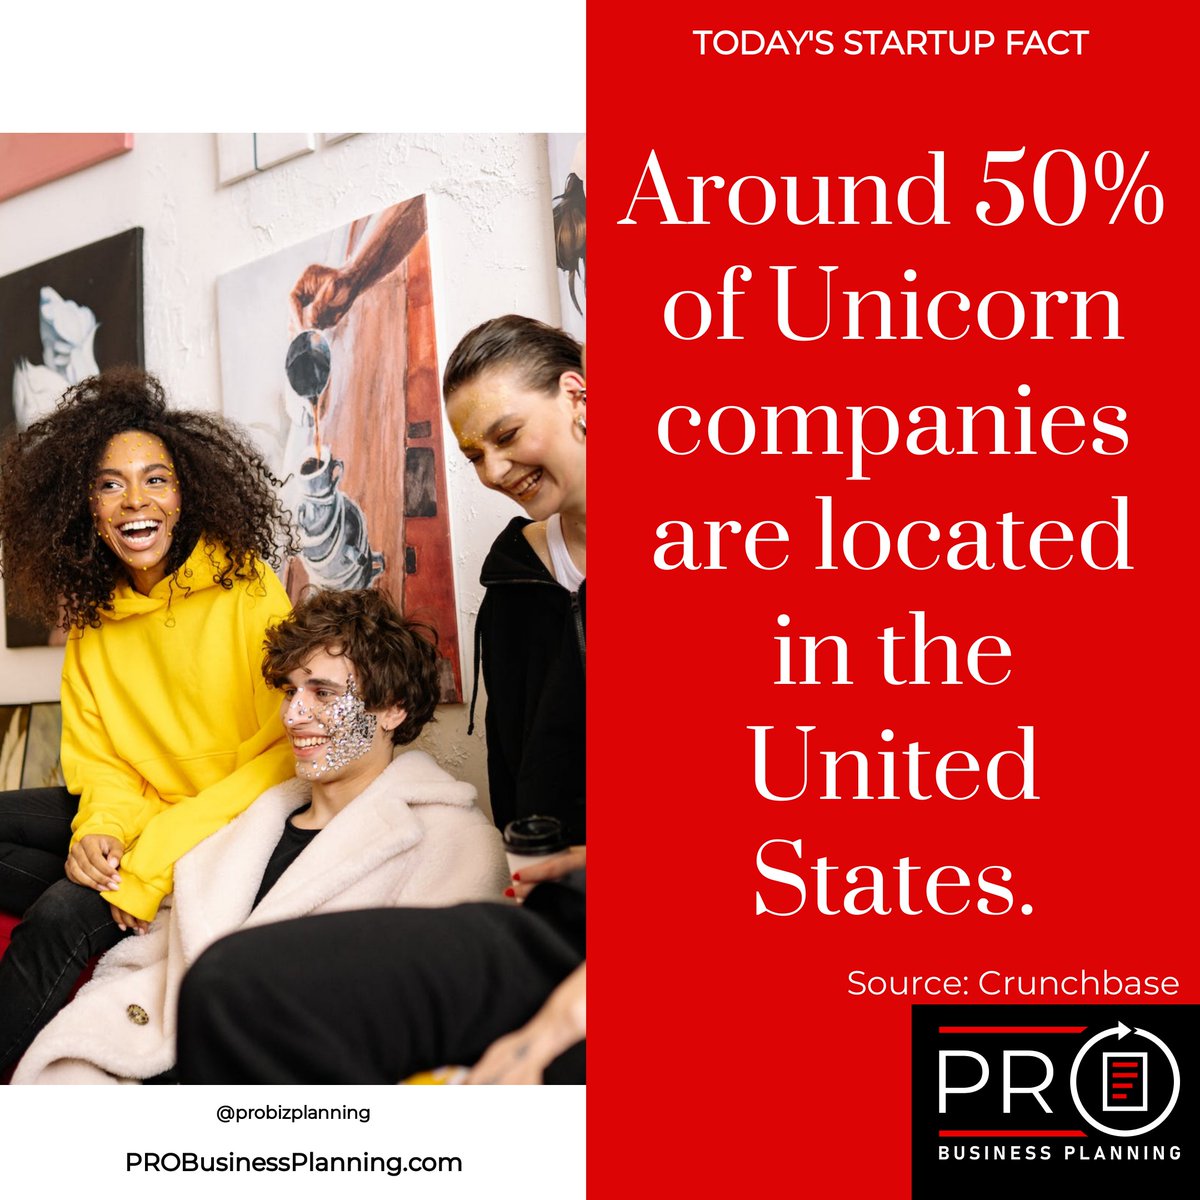 Around 50% of Unicorn companies are located in the United States. Dream big and ride with unicorns. Half of them gallop on American soil, so why not join the herd?

 #startuplife #startup #startupinspiration #startupknowledge #startupedia